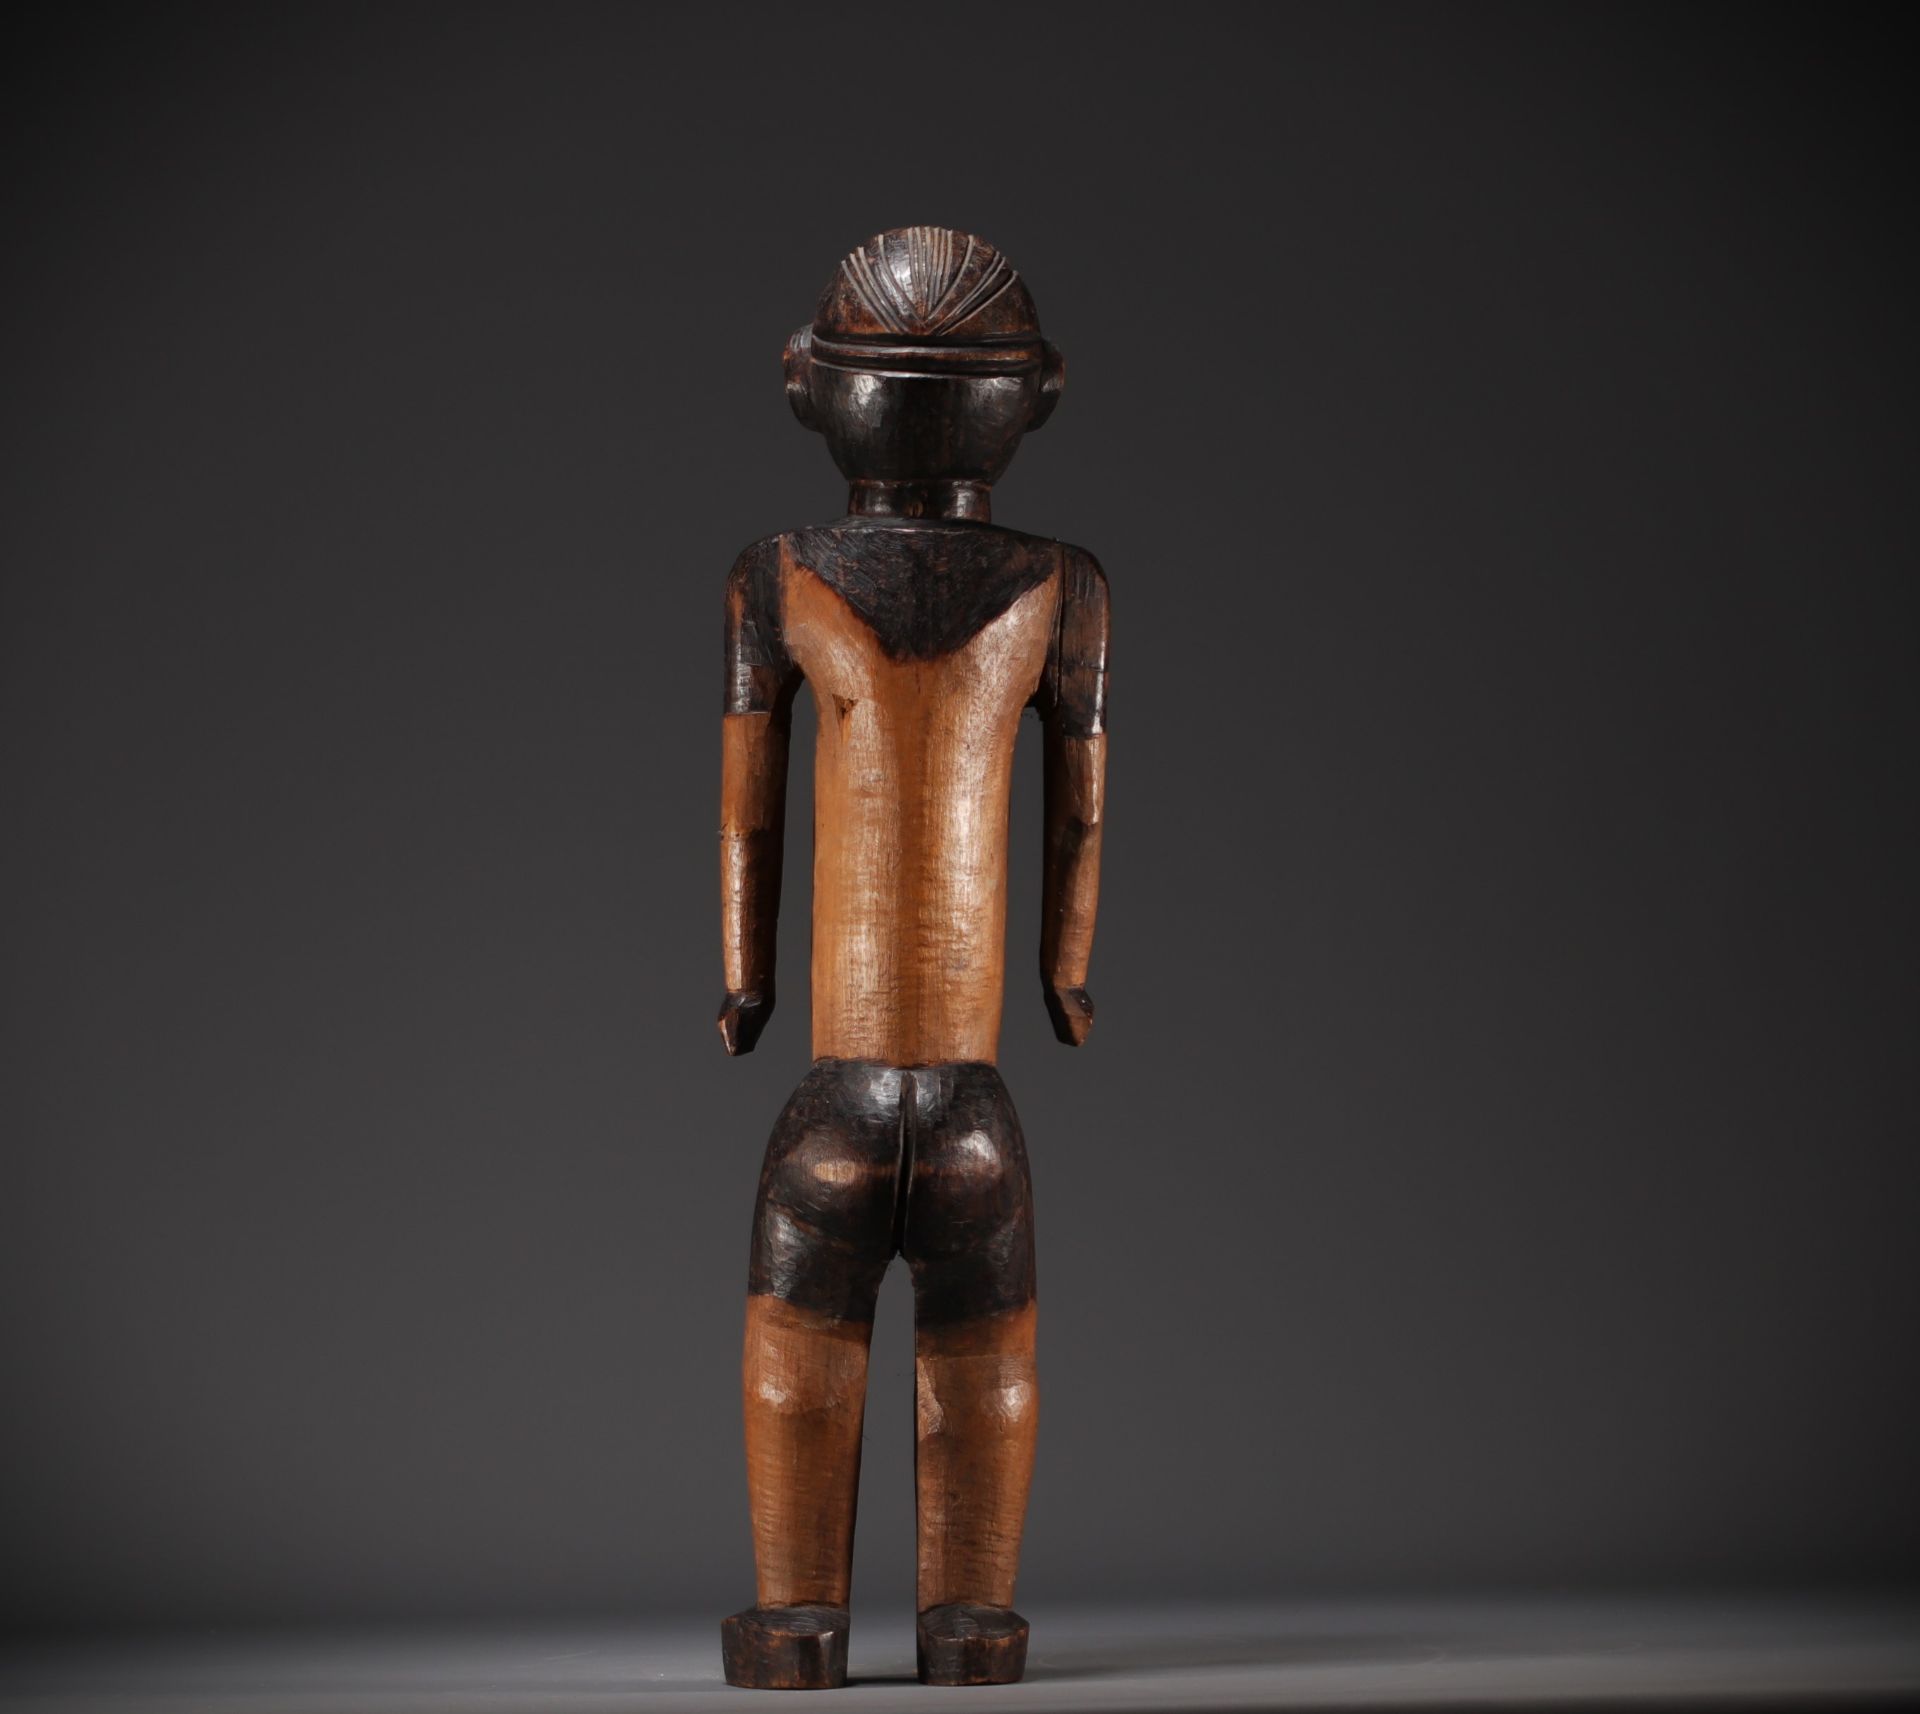 Large Mbanza or Ngbaka figure collected around 1900 - Rep.Dem.Congo - Image 5 of 5